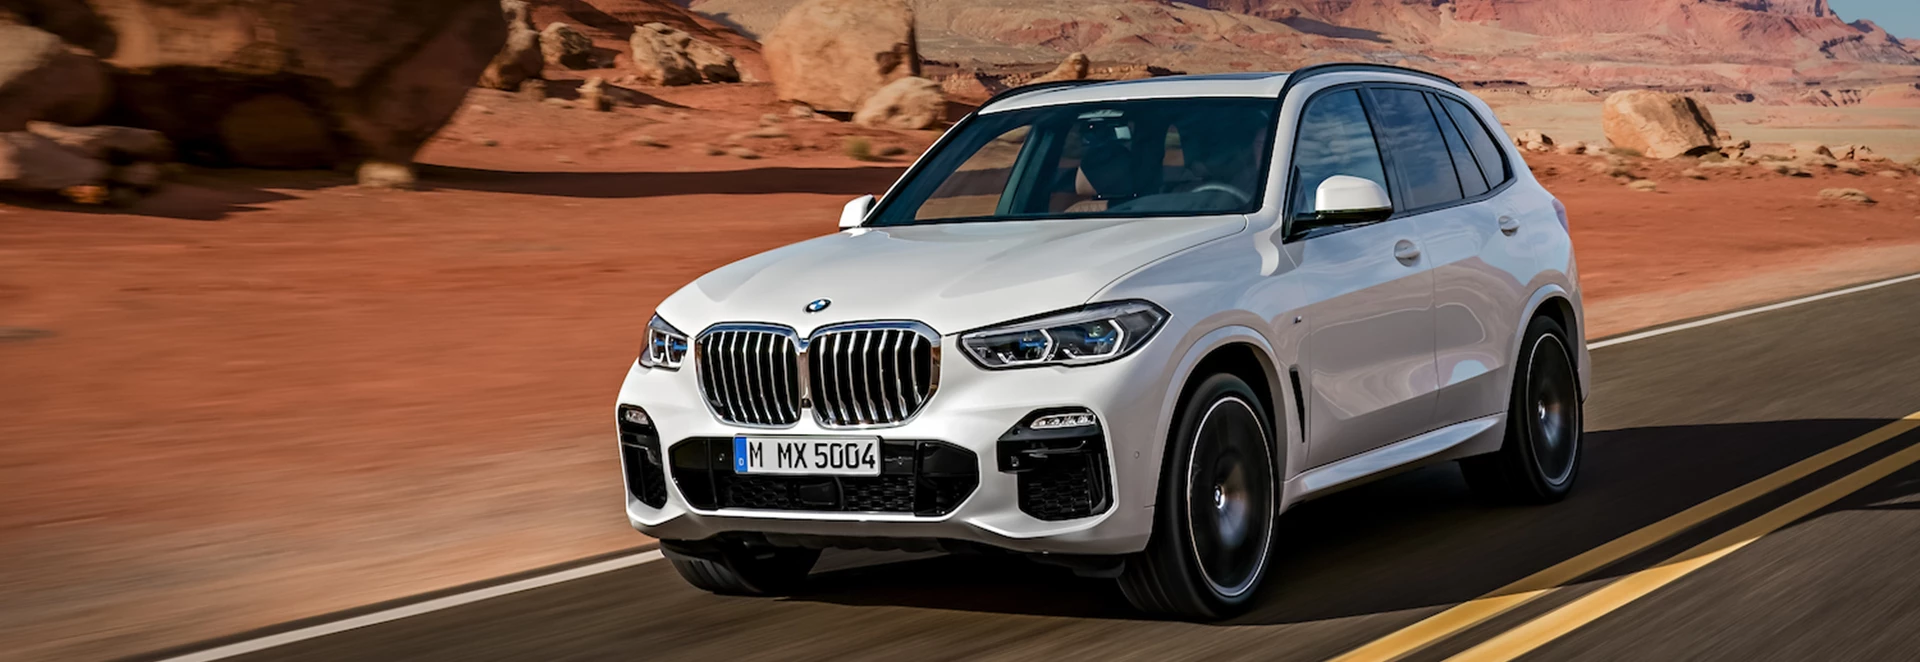 Best Cars for Residual Values in 2019